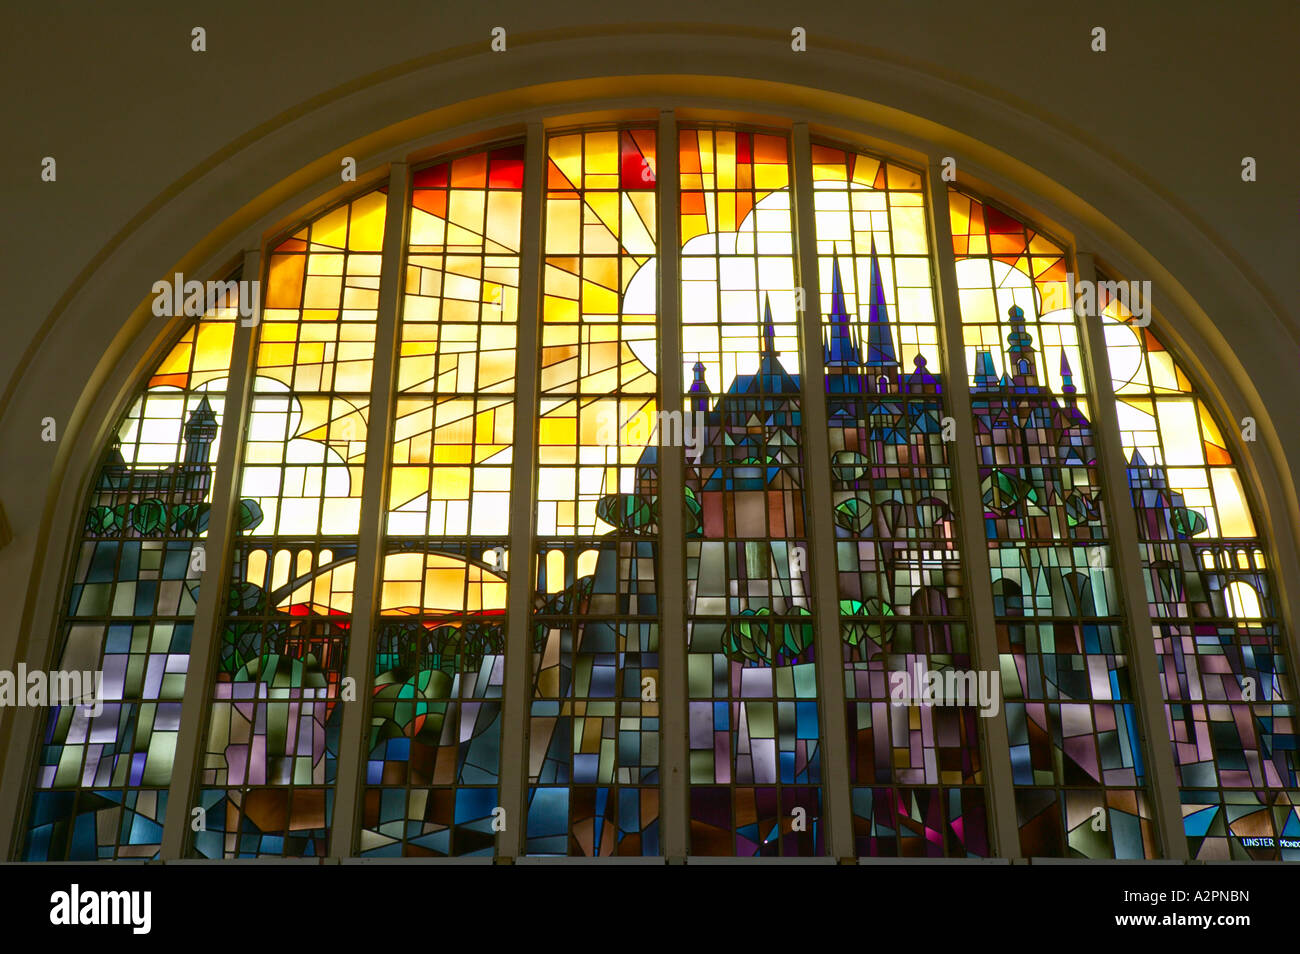 Stained glass window in the Gare Centrale of Luxembourg City, which depicts the Luxembourg City skyline. Stock Photo